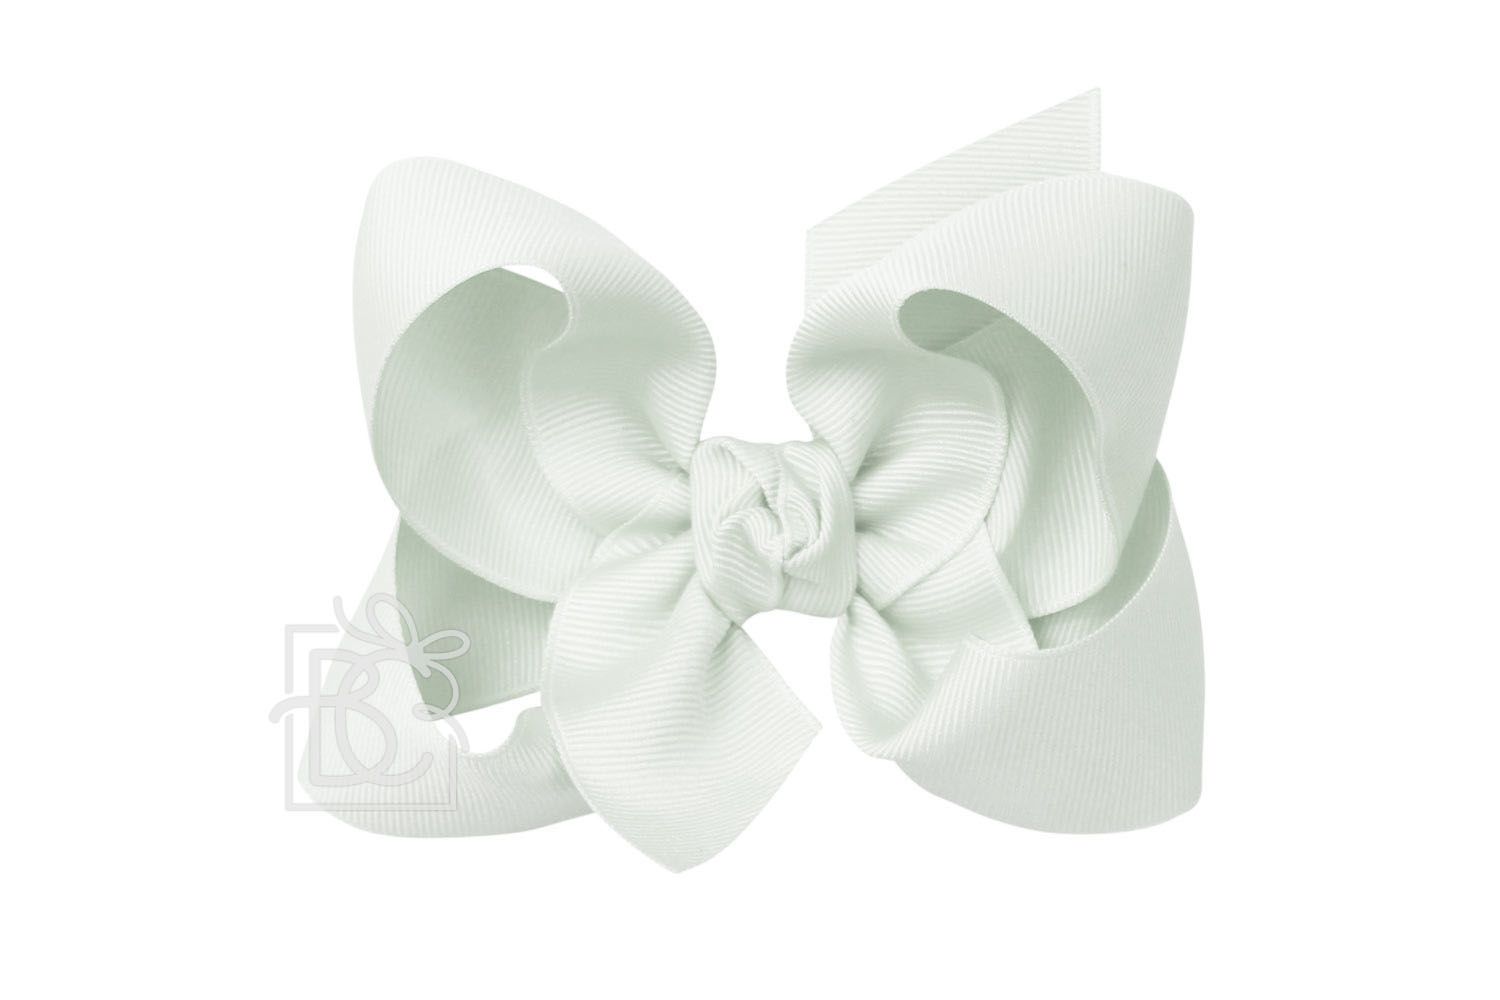 Beyond Creations - Hair Bows and Accessories - Large 4.5